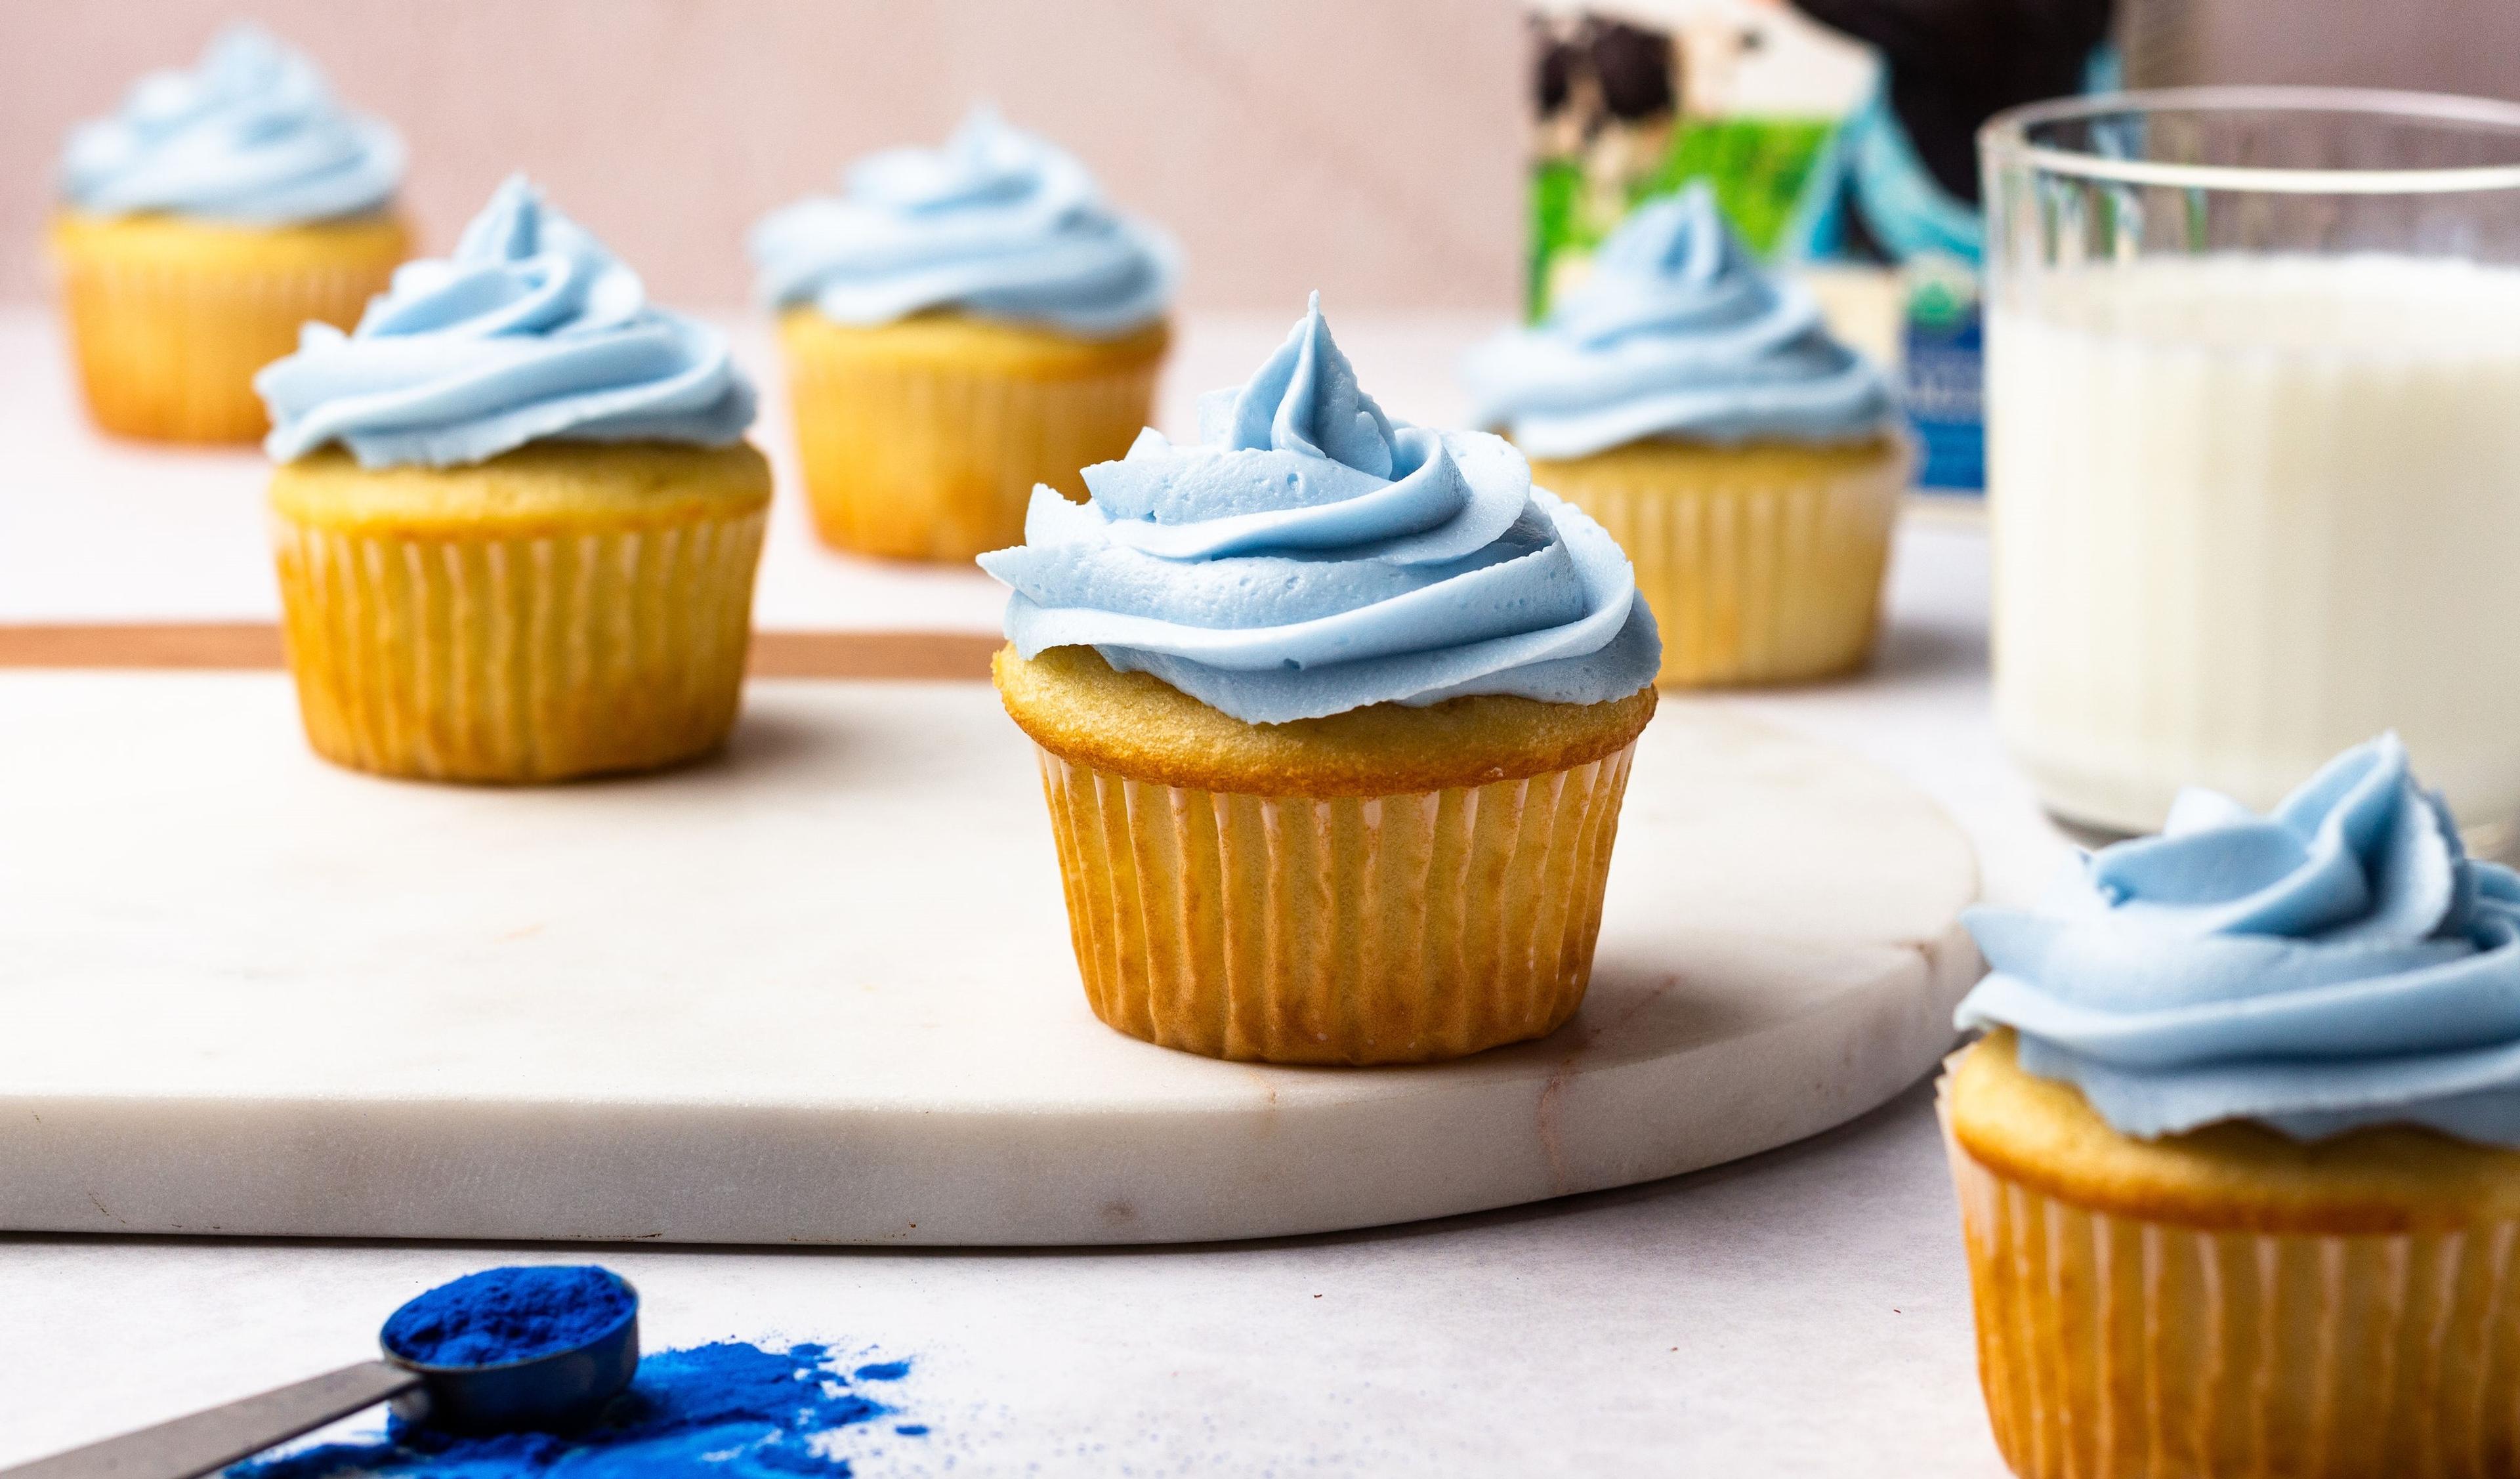 Blue spirulina is used for a natural frosting color on cupcakes placed next to a glass of milk.